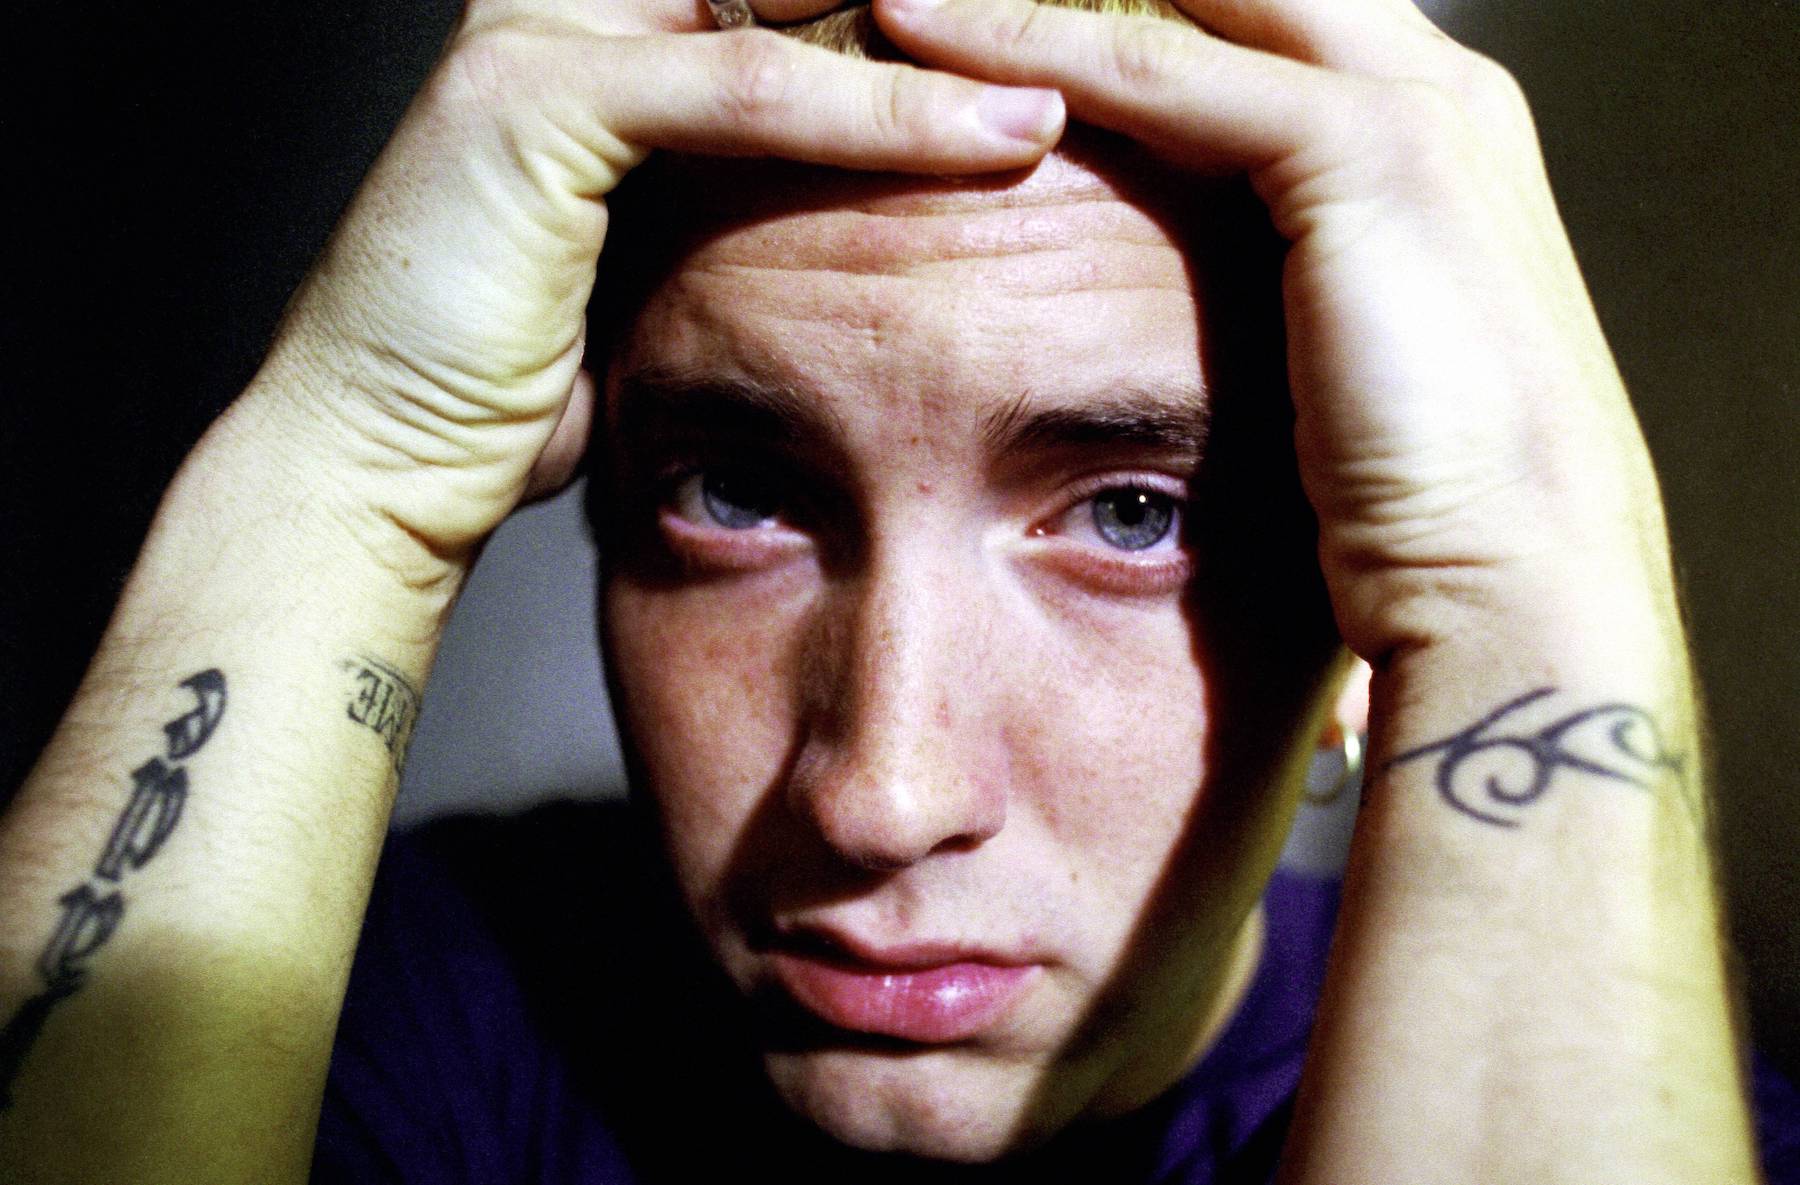 Eminem, who was subject to bullying as a child, posing for a photo